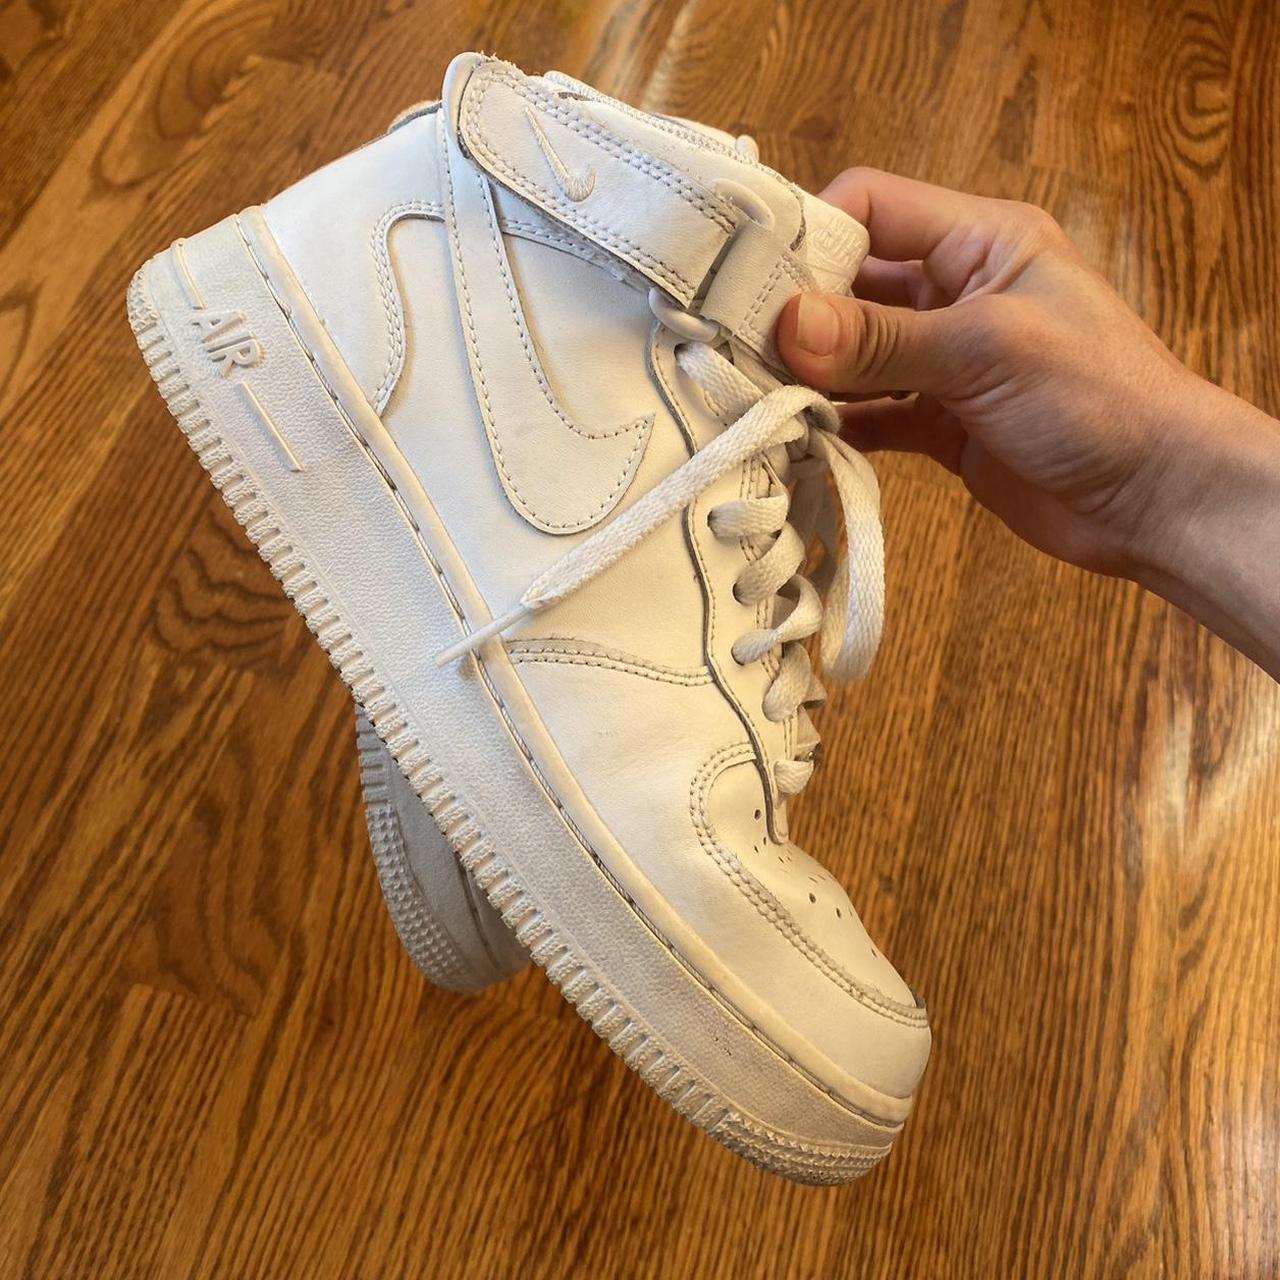 Nike Air Force 1 High White/White Women's Shoes, Size: 6